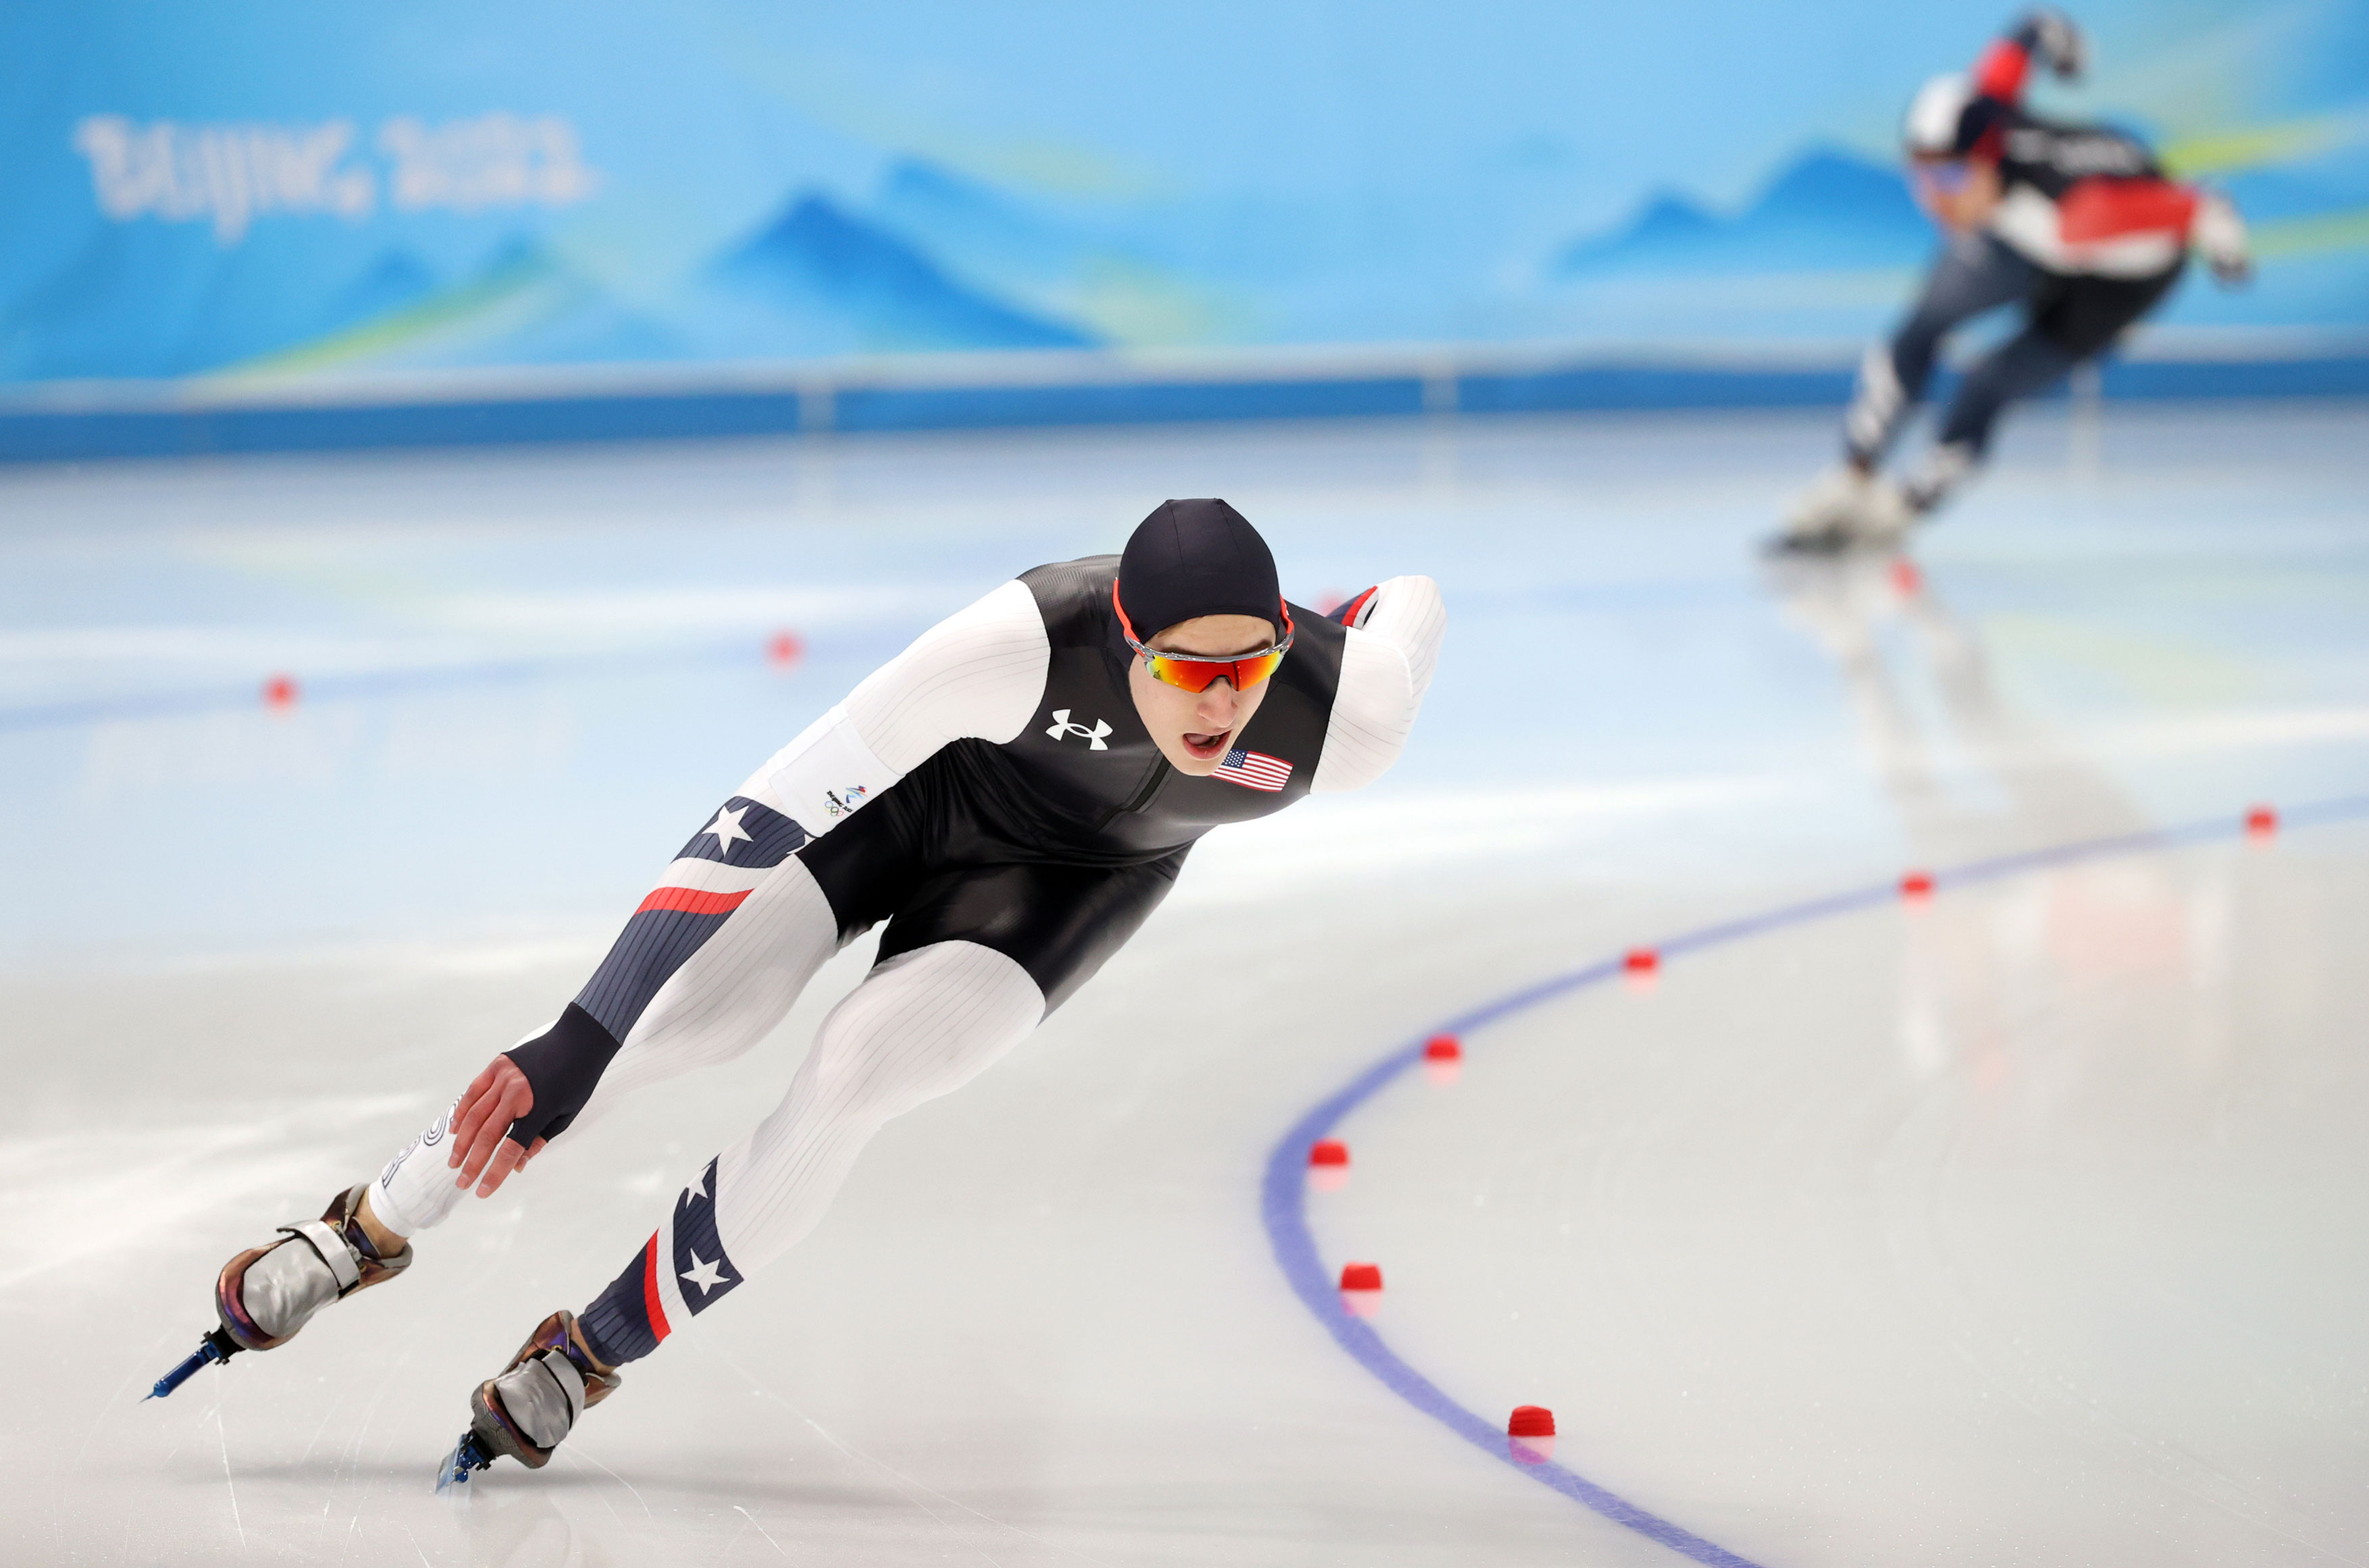 Jordan Stolz (L) of Team USA and Kim Min-seok of South Korea compete in the men's 1,000m speed skating race on Friday.